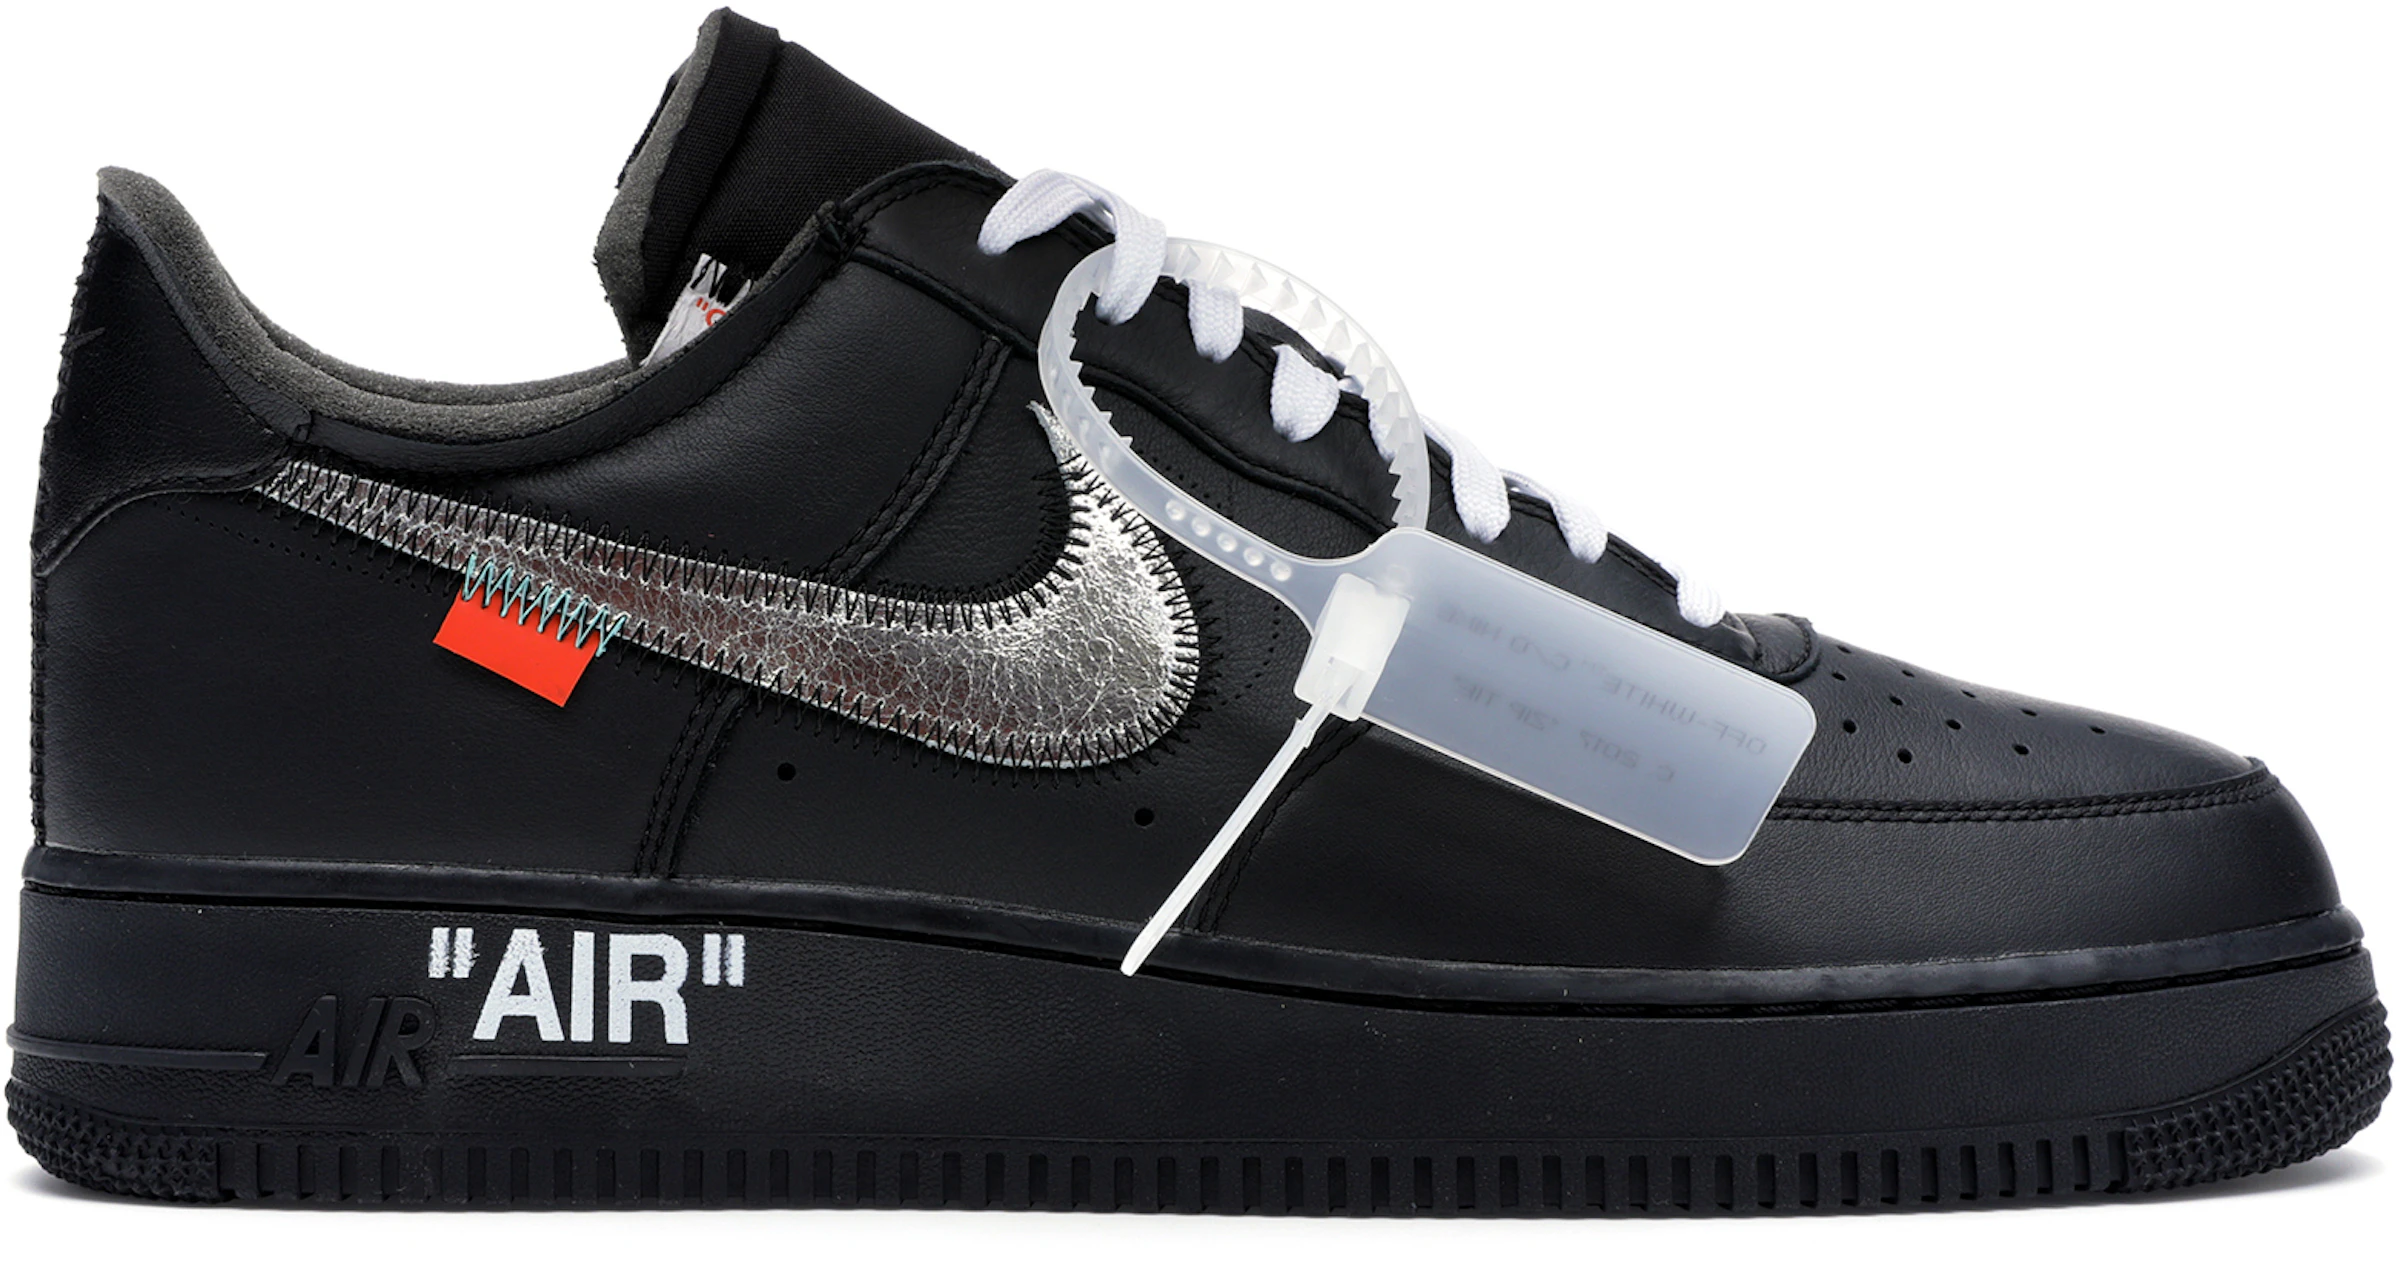 Nike Air Force 1 Shoes - Average Price